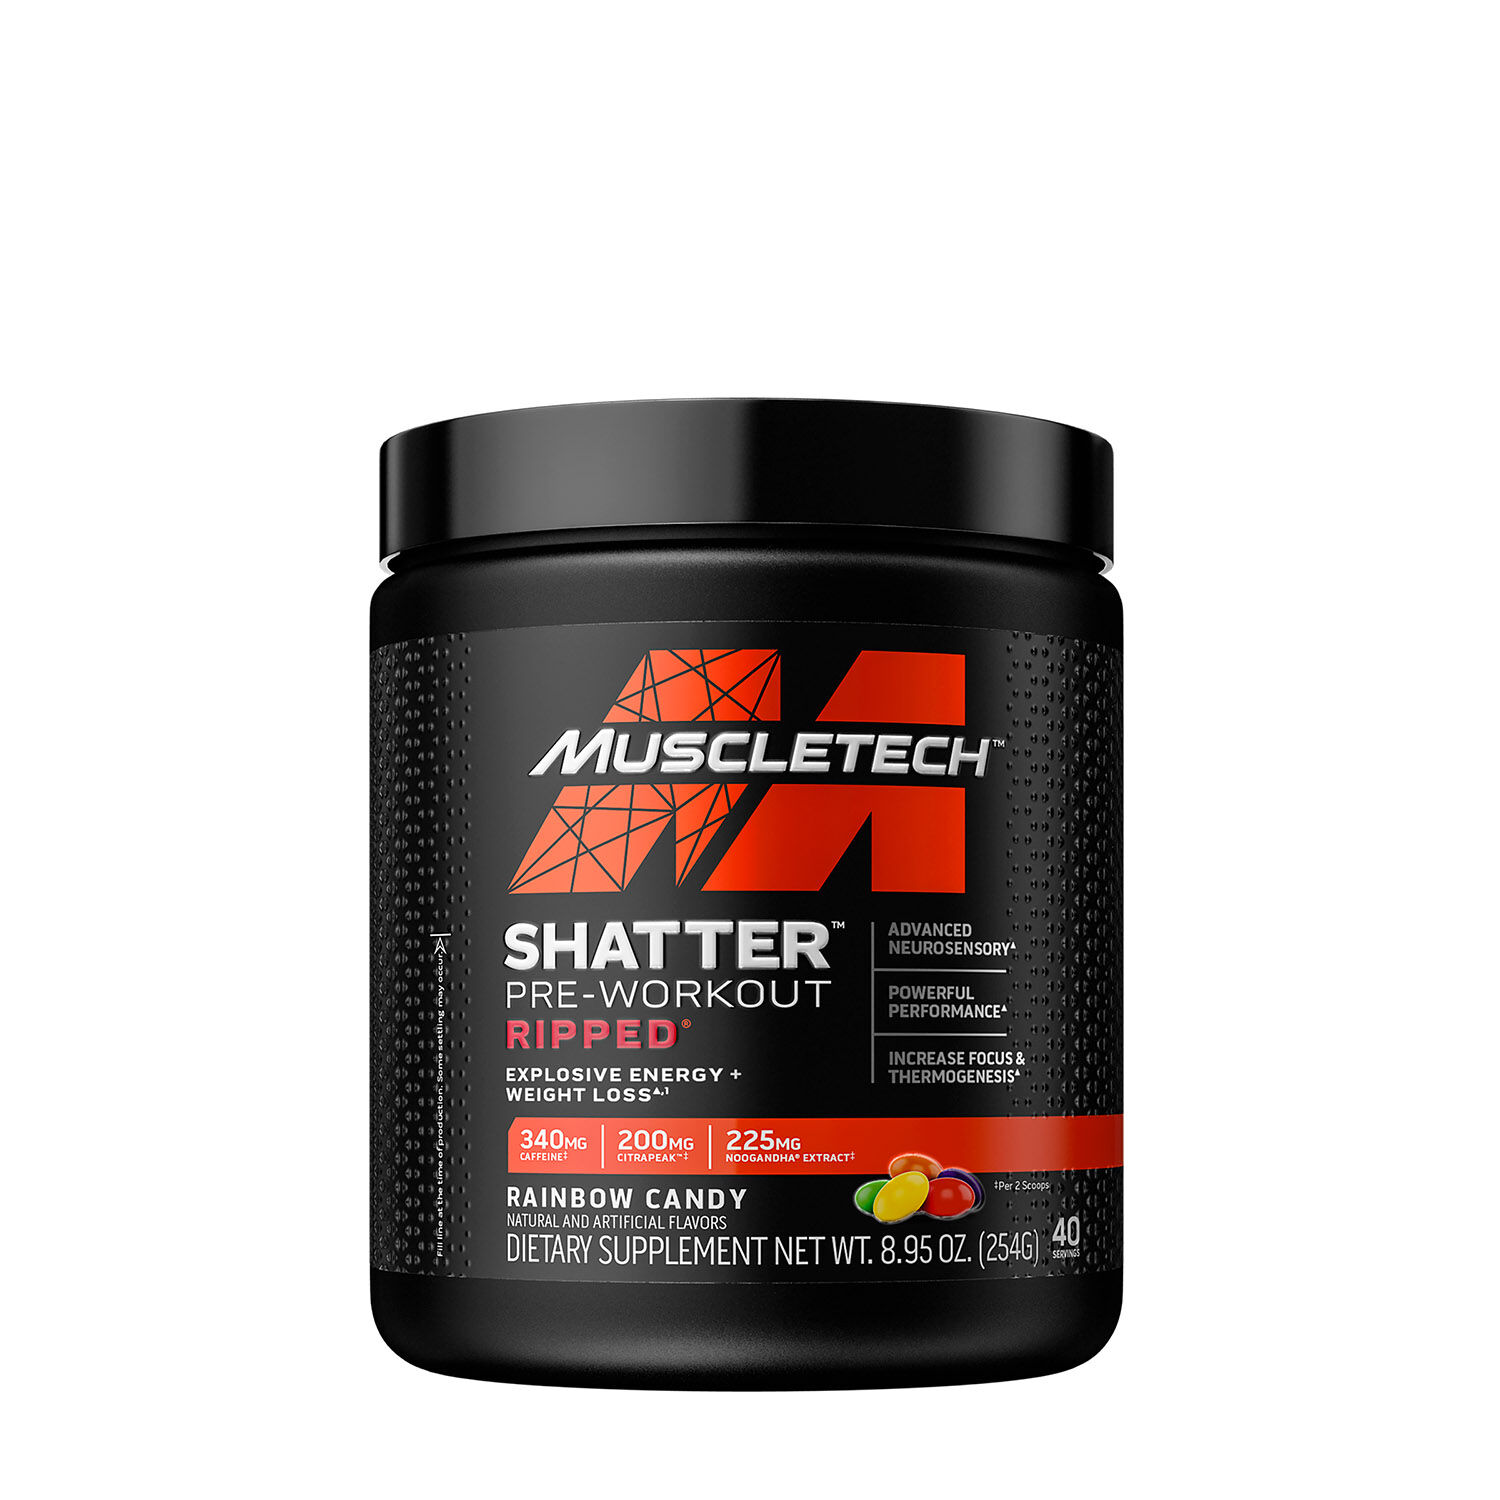 shatter pre workout ingredients